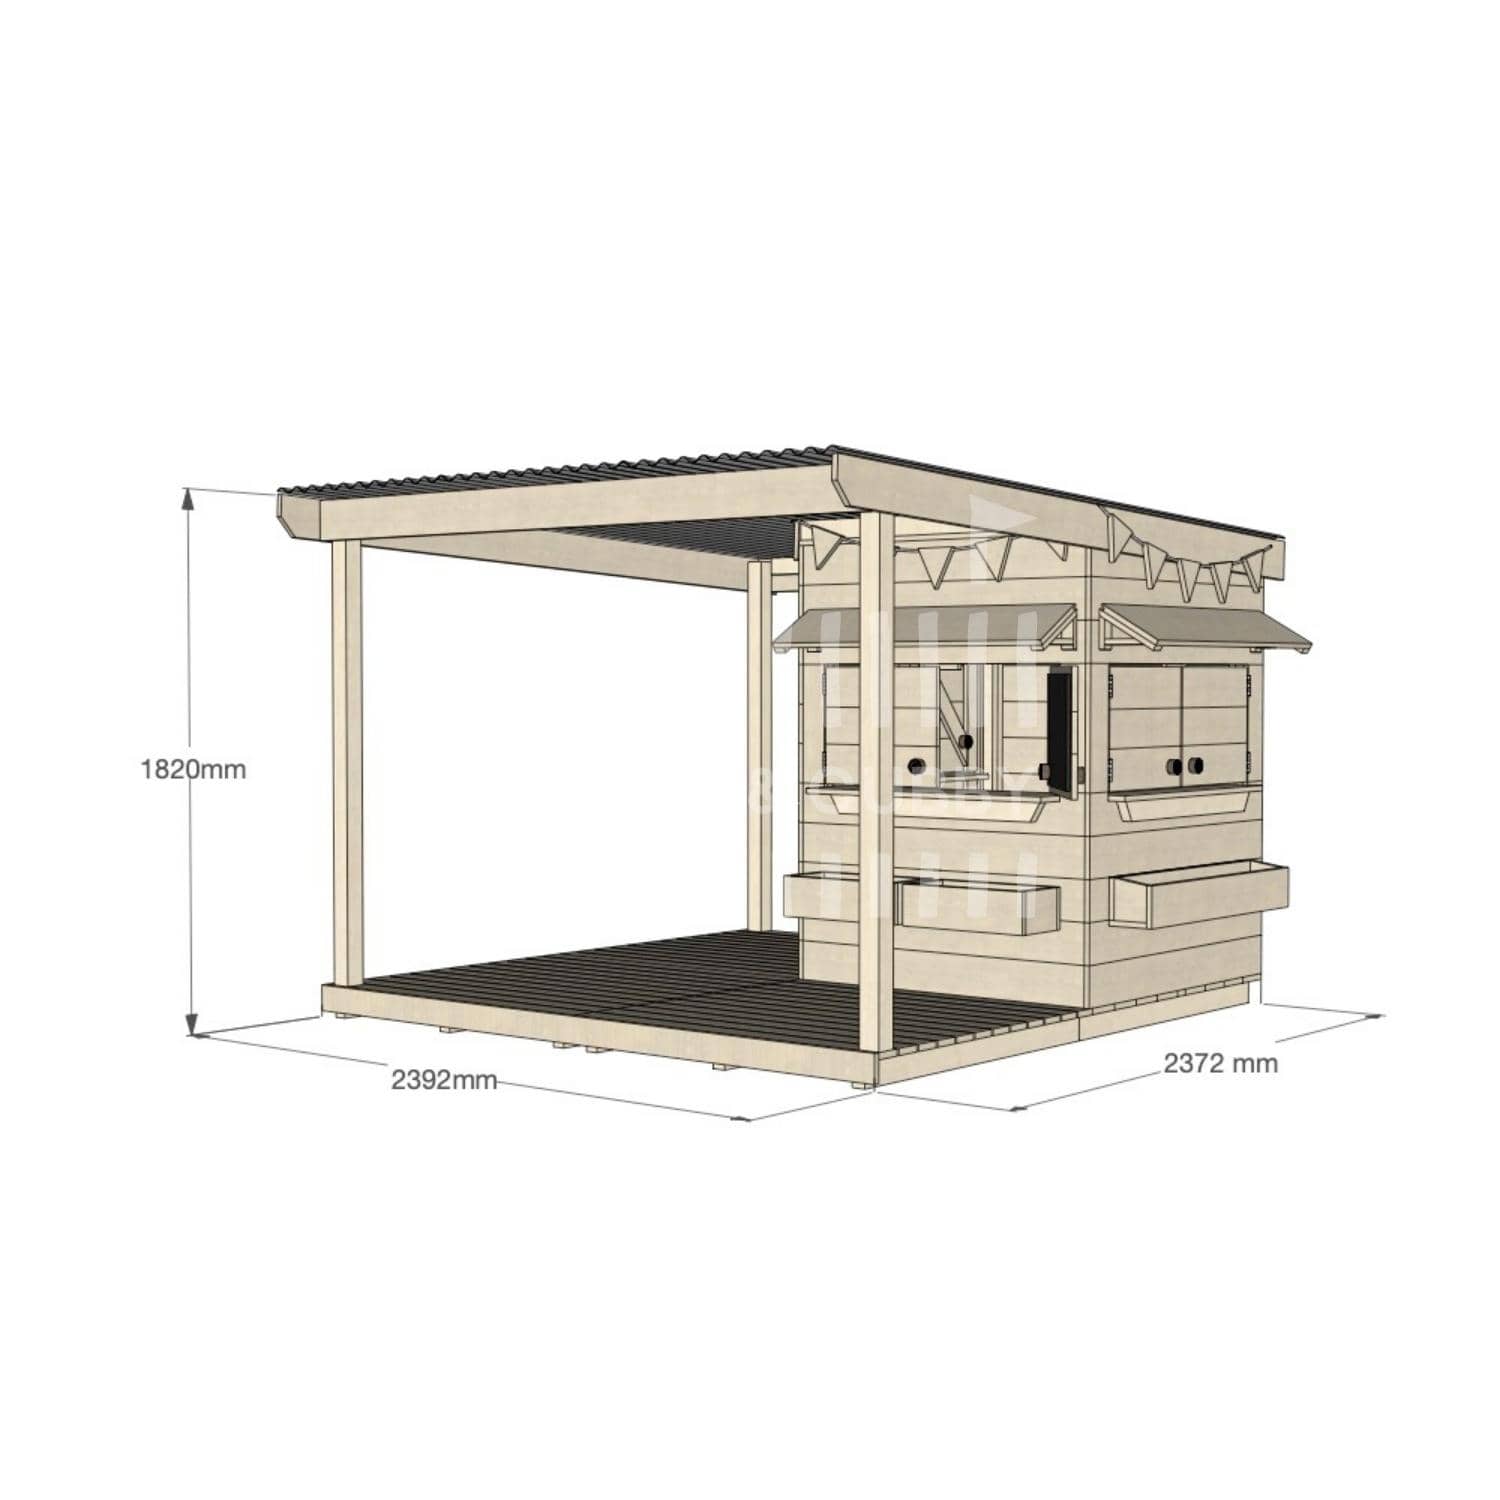 Raw pine cubby house with wraparound verandah for residential backyards little square size with dimensions